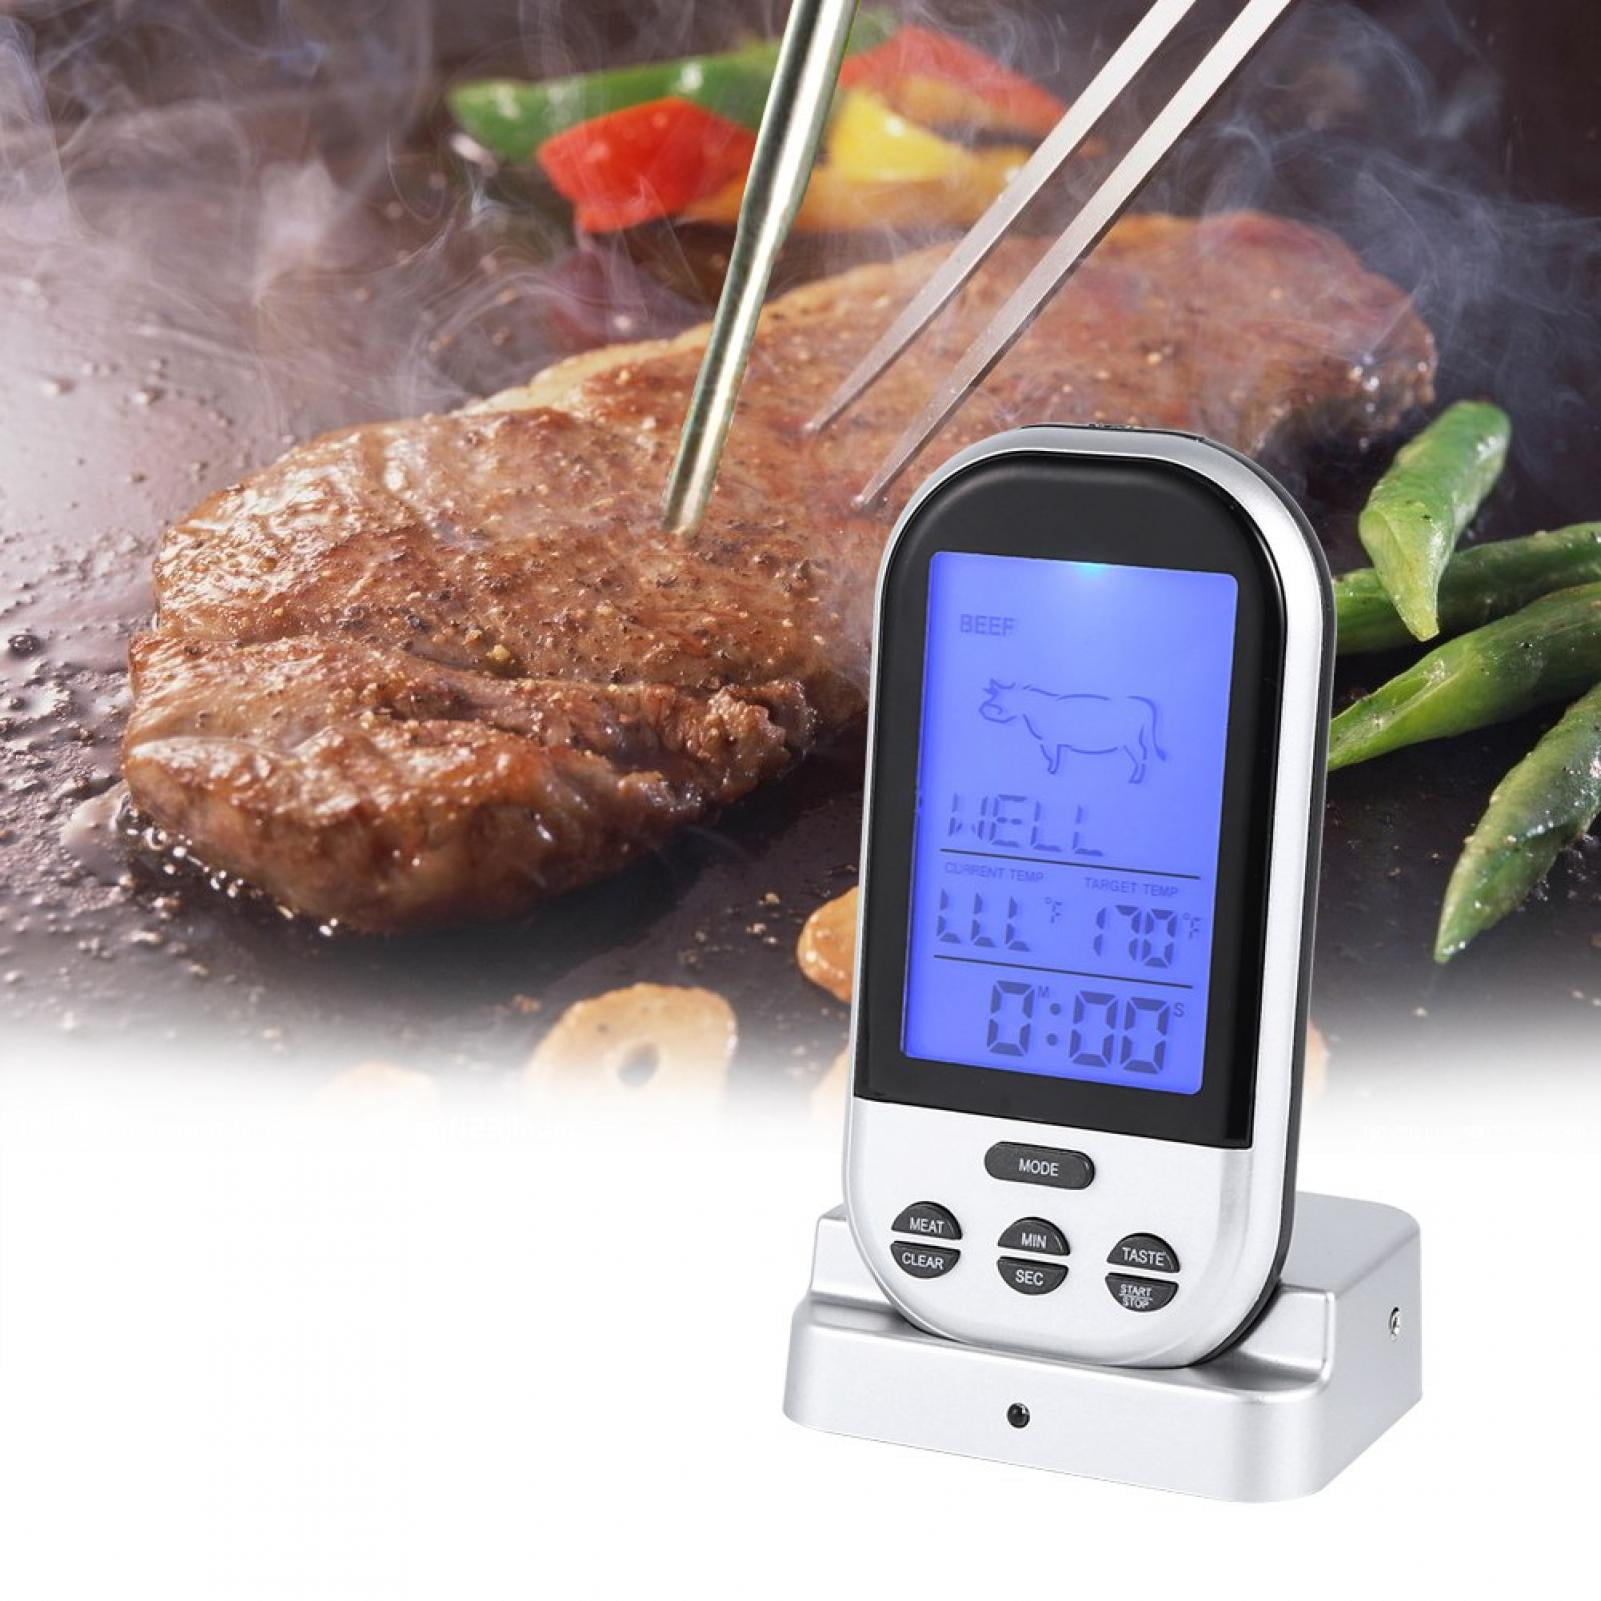 Digital LCD Wireless Remote Kitchen Oven Food Cooking Meat BBQ Grill Thermometer 